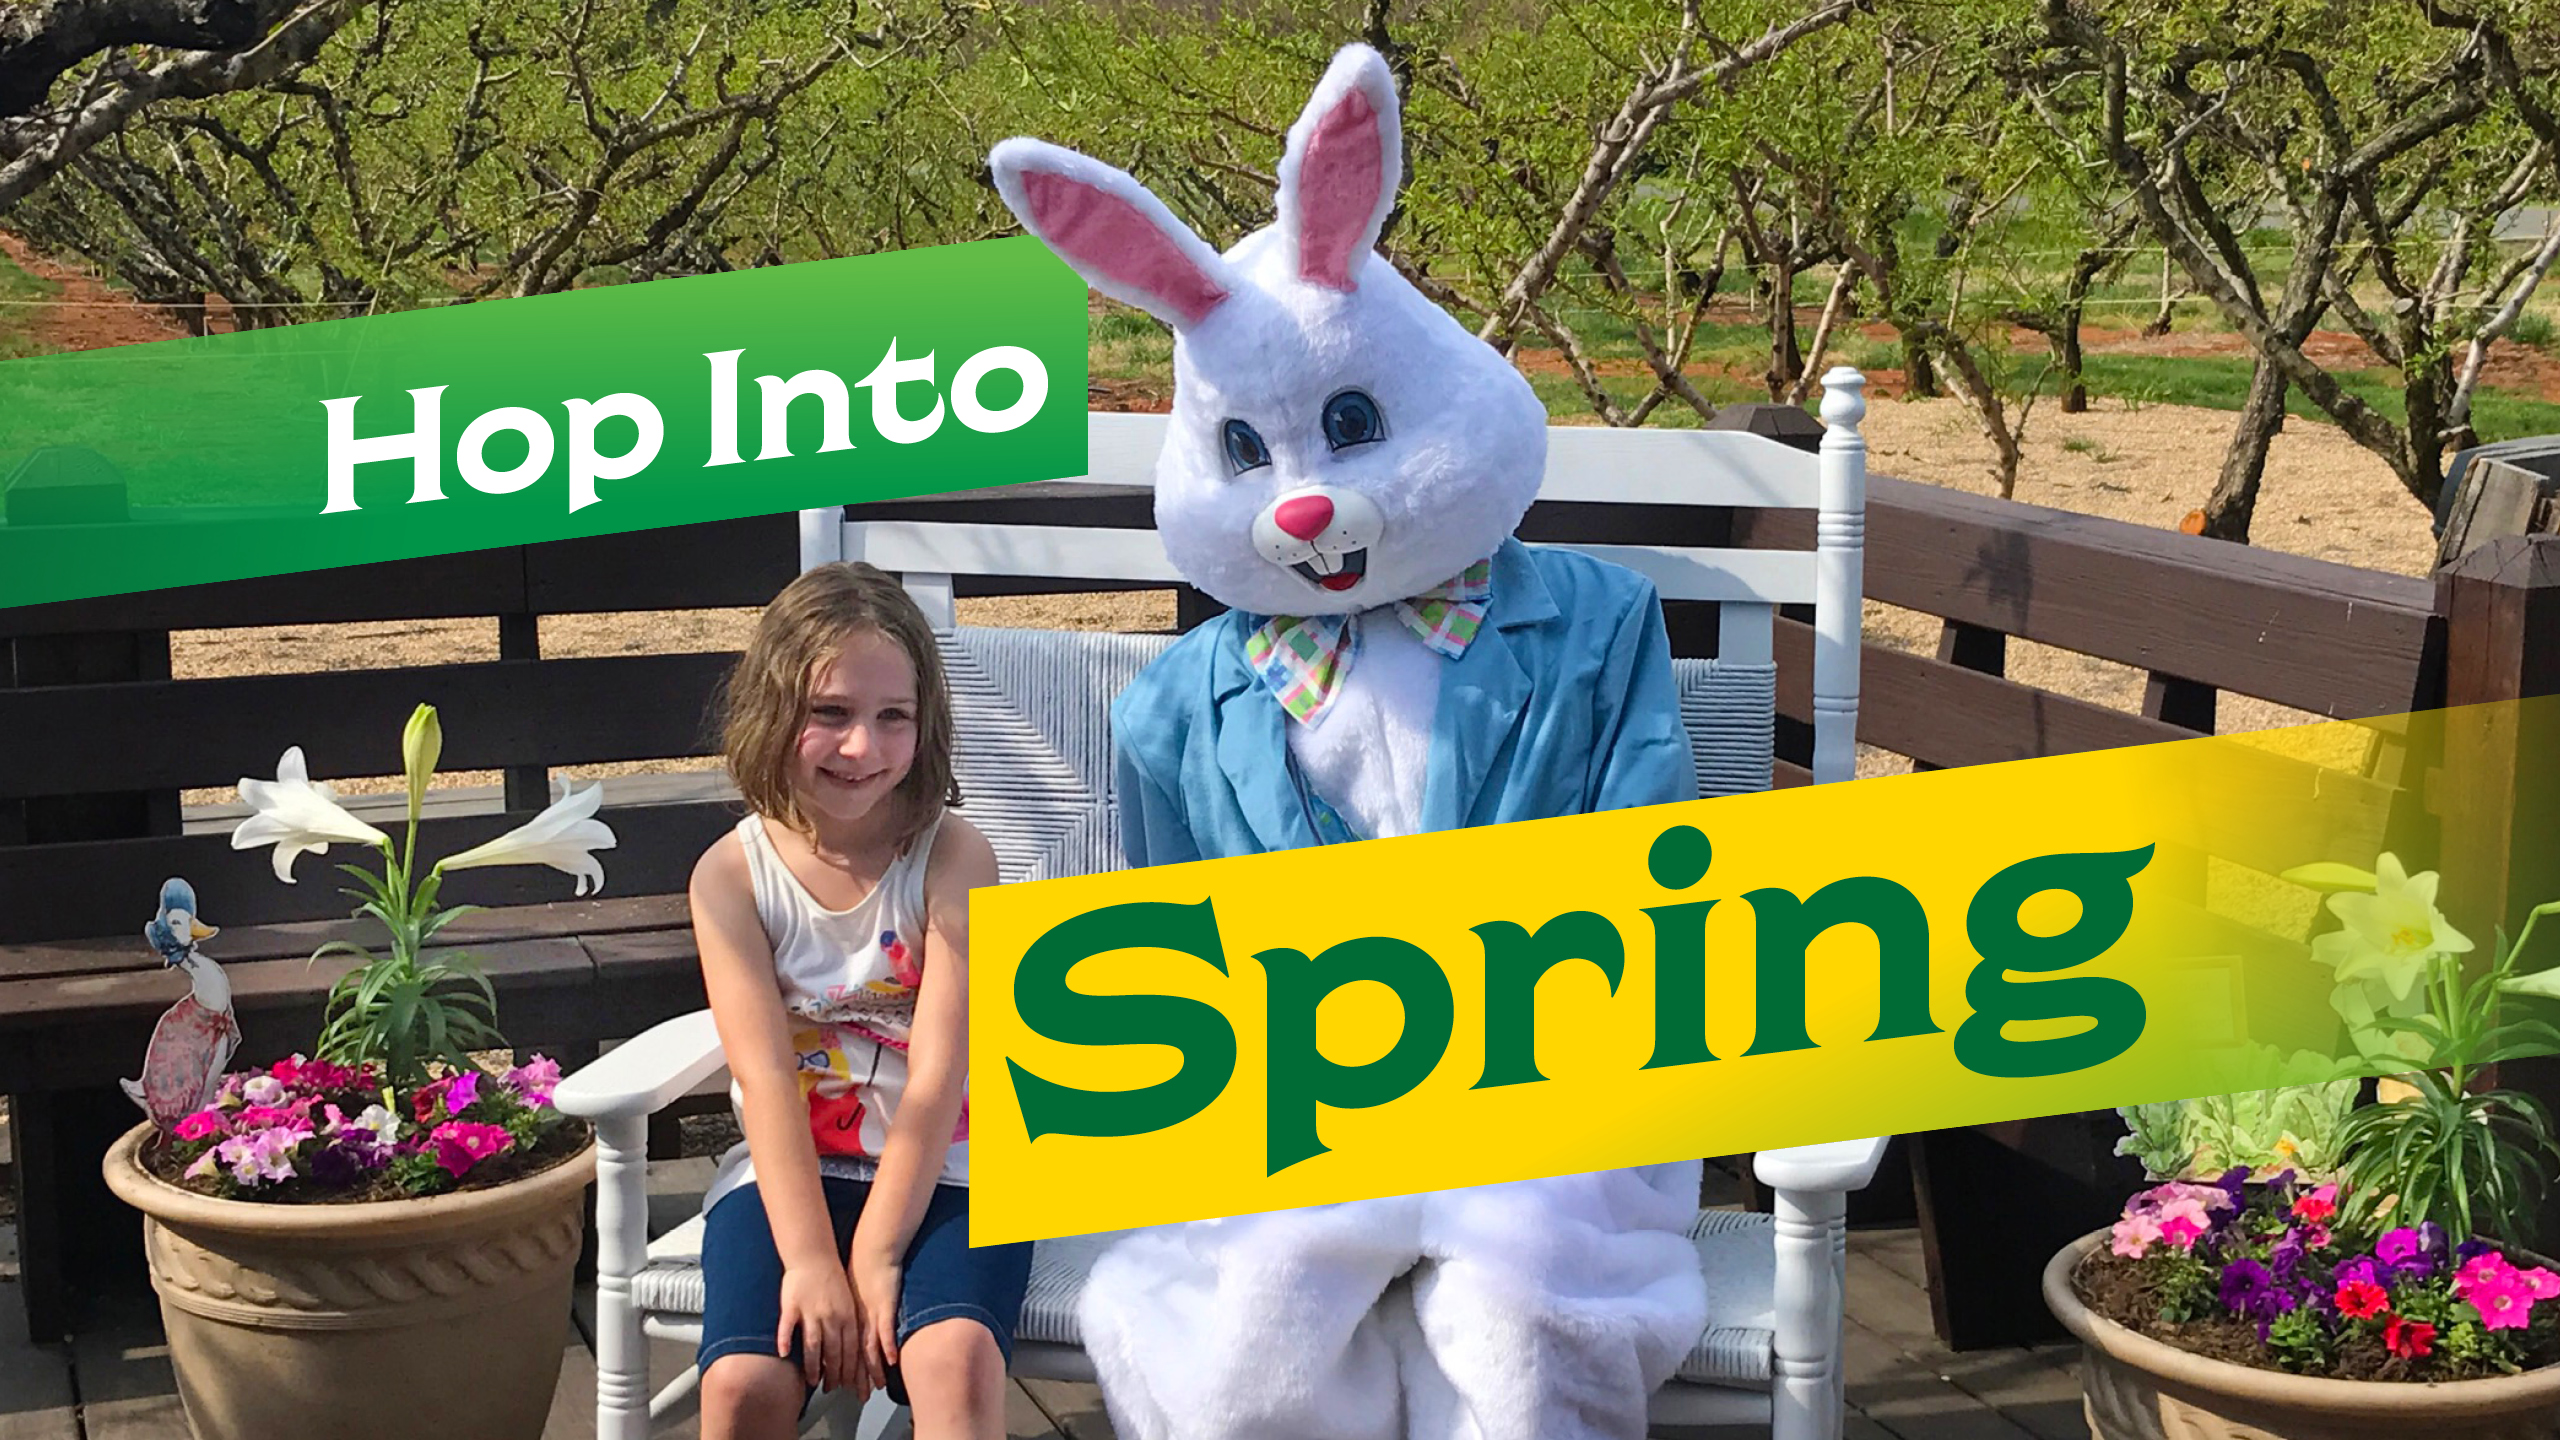 Hop Into Spring Easter event at Chiles Peach Orchard